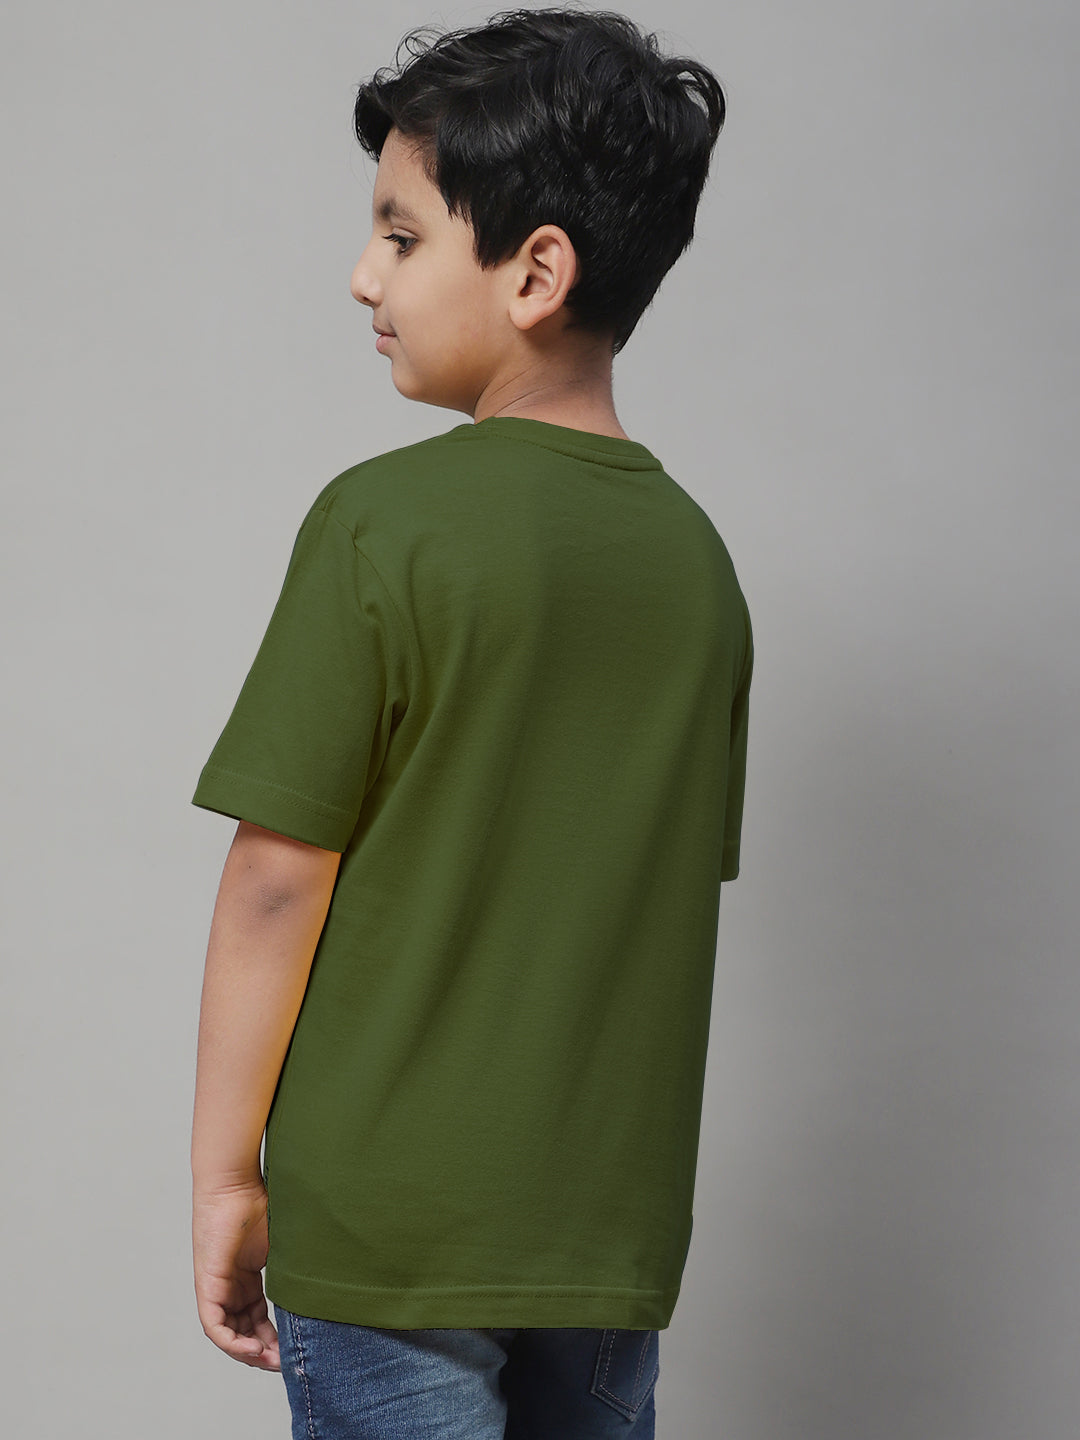 Pure Cotton Half Sleeves Round Neck 2-7Y Boys T-Shirt - Friskers